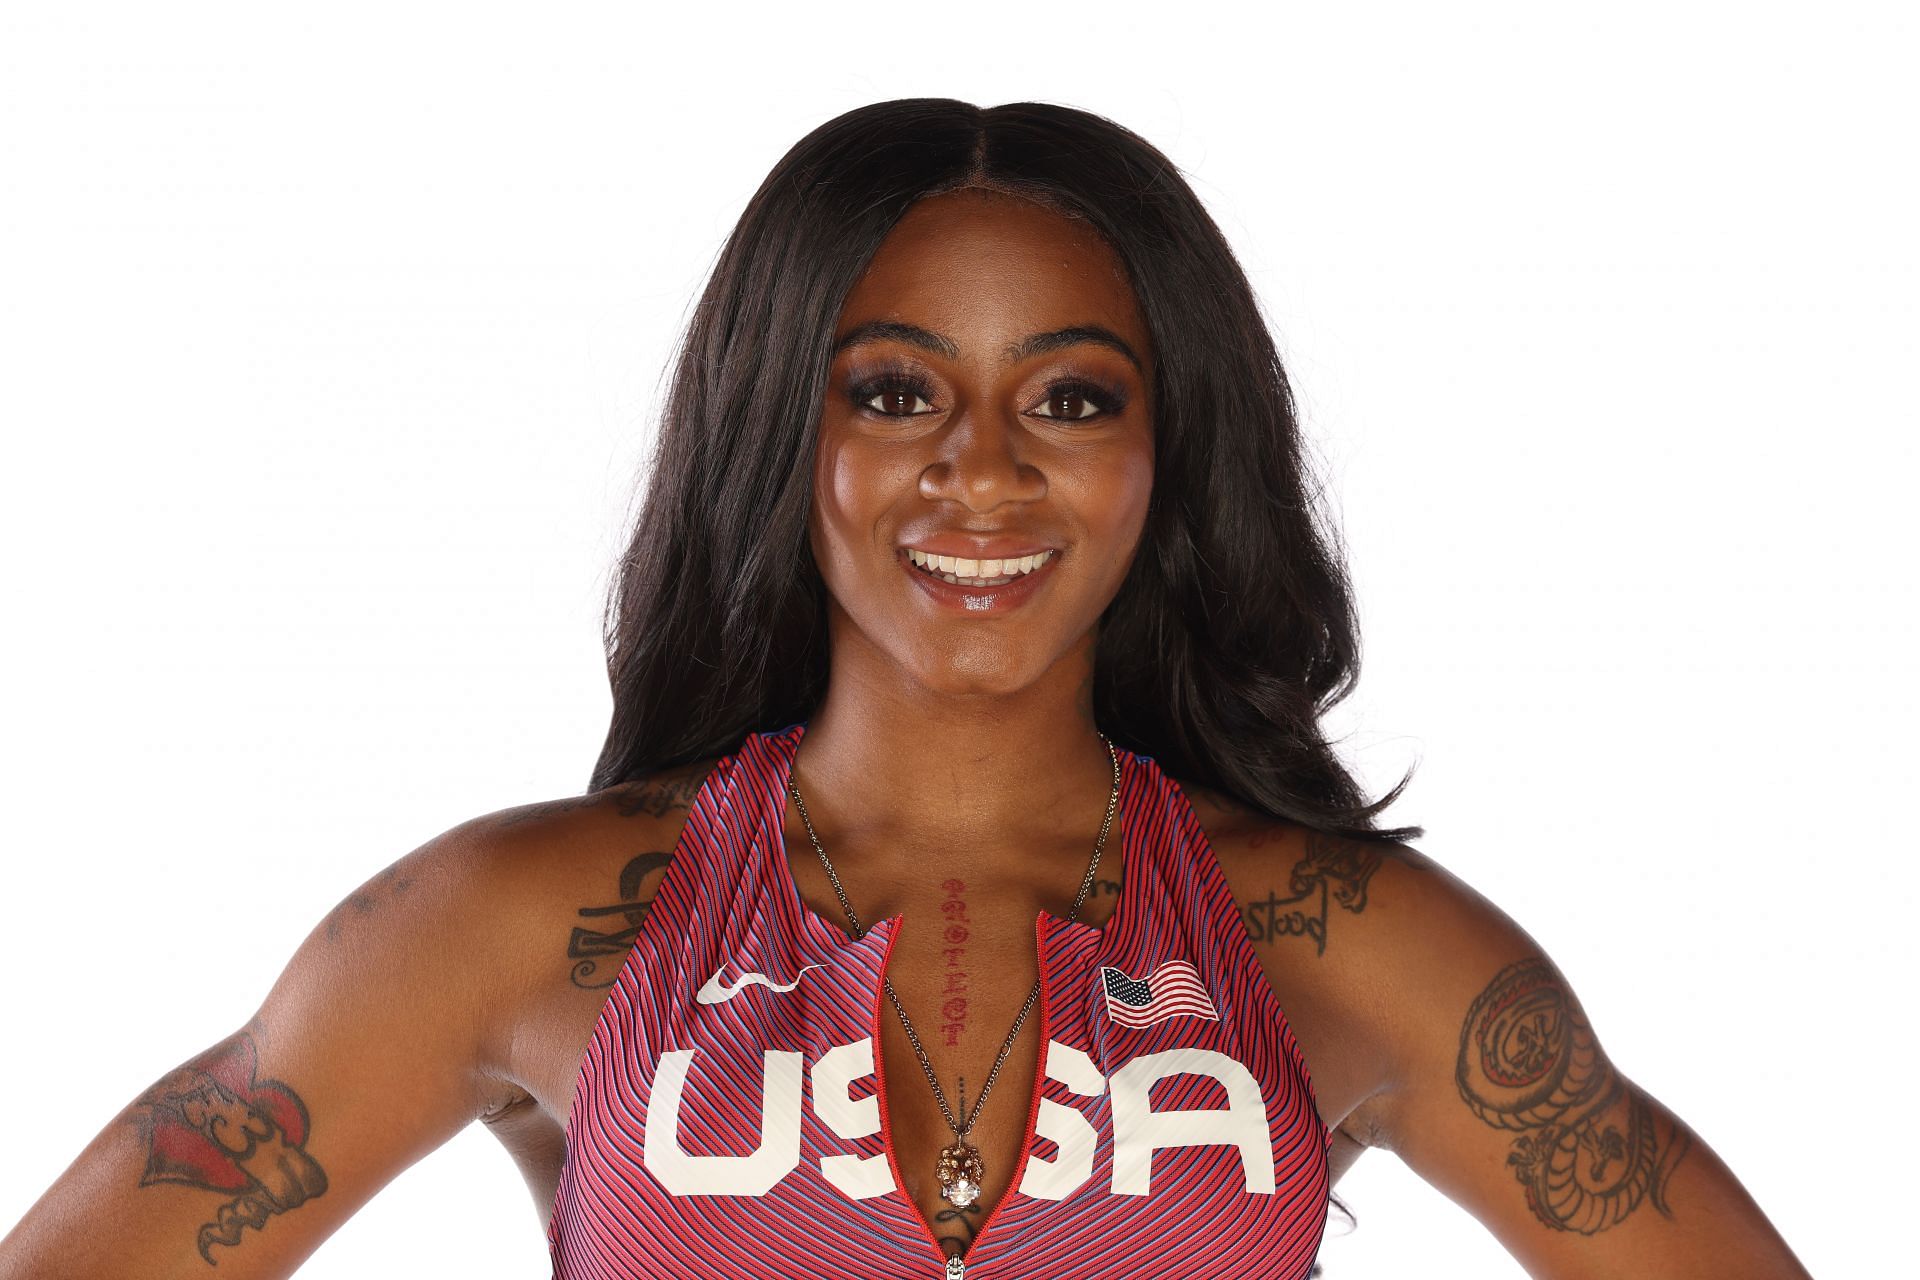 Sha&#039;Carri Richardson will compete in the Olympic trials to compete in her first Olympics.